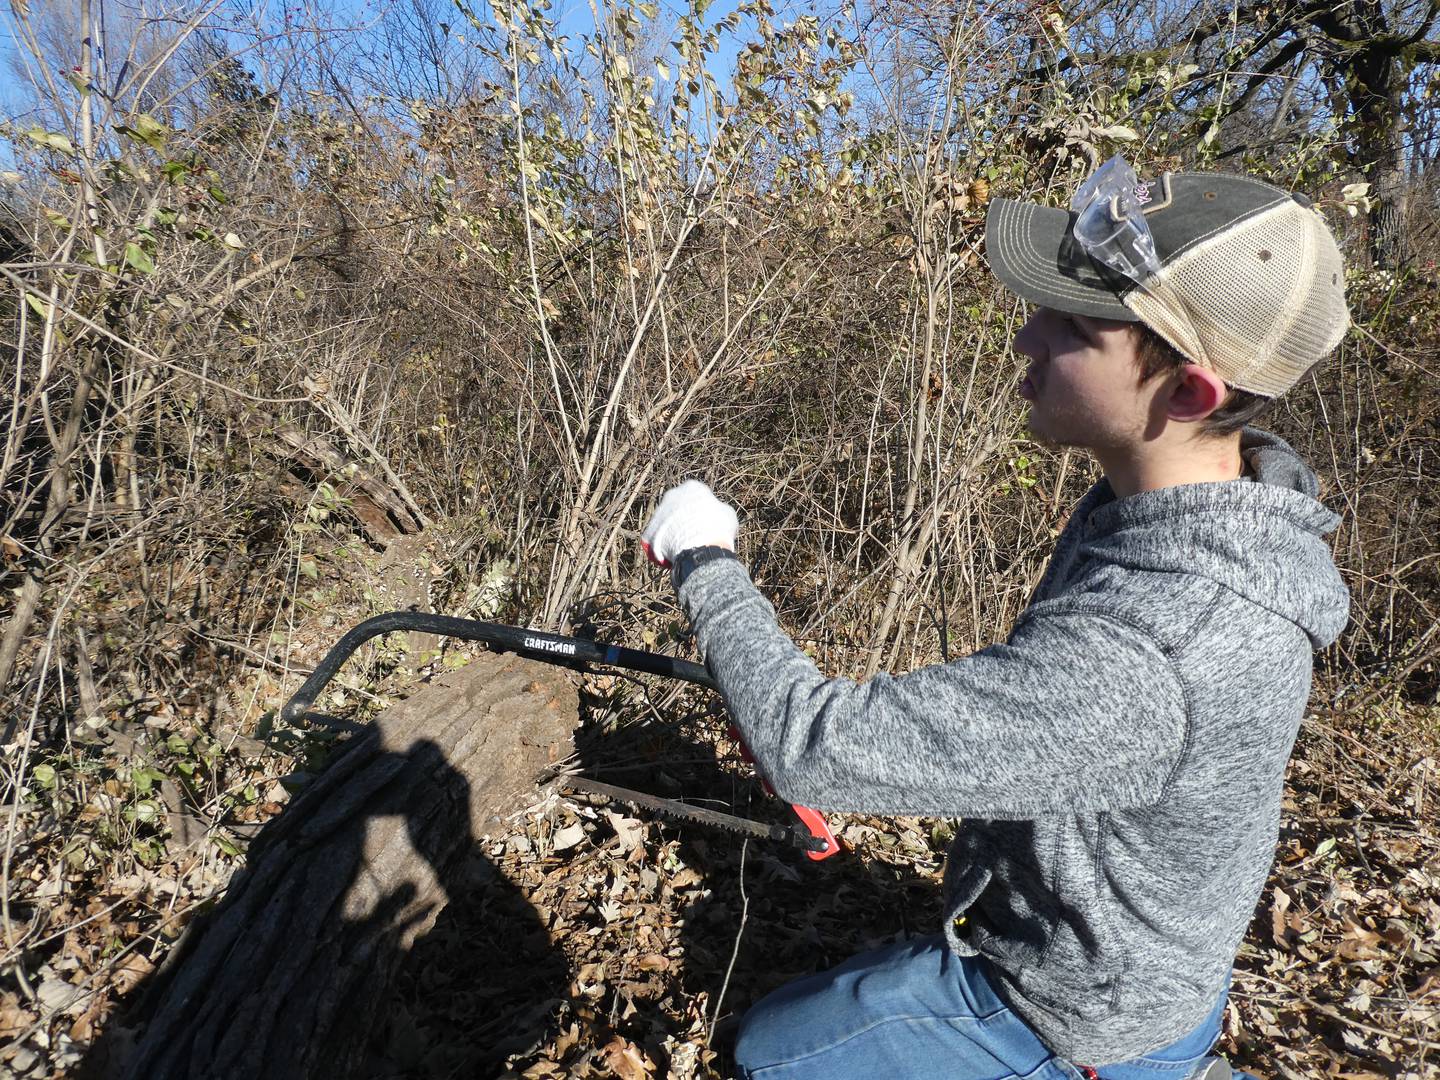 Volunteers, such as University of Wisconsin–Stevens Point freshman Zach Klemm, help clear brush and invasive species at Boone Creek Conservation Area in Bull Valley, one of half a dozen sites being restored on Friday, Nov. 25, 2022, as part of McHenry County Conservation District's Green Friday initiative.